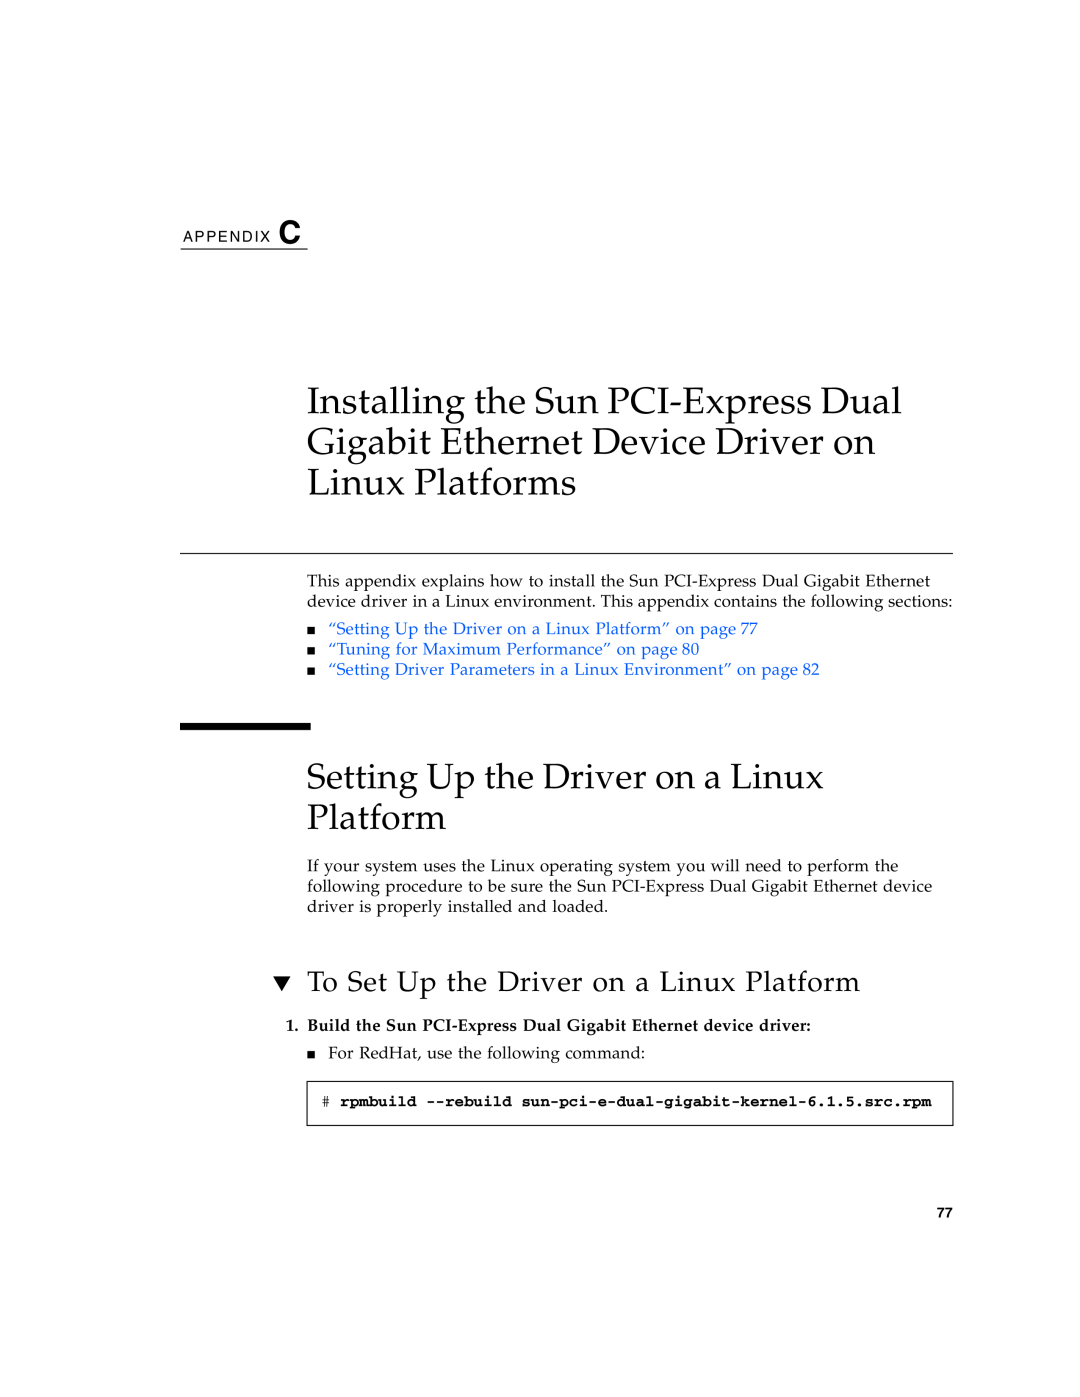 Sun Microsystems Gigabit Ethernet MMF/UTP Adapter manual Setting Up the Driver on a Linux Platform 